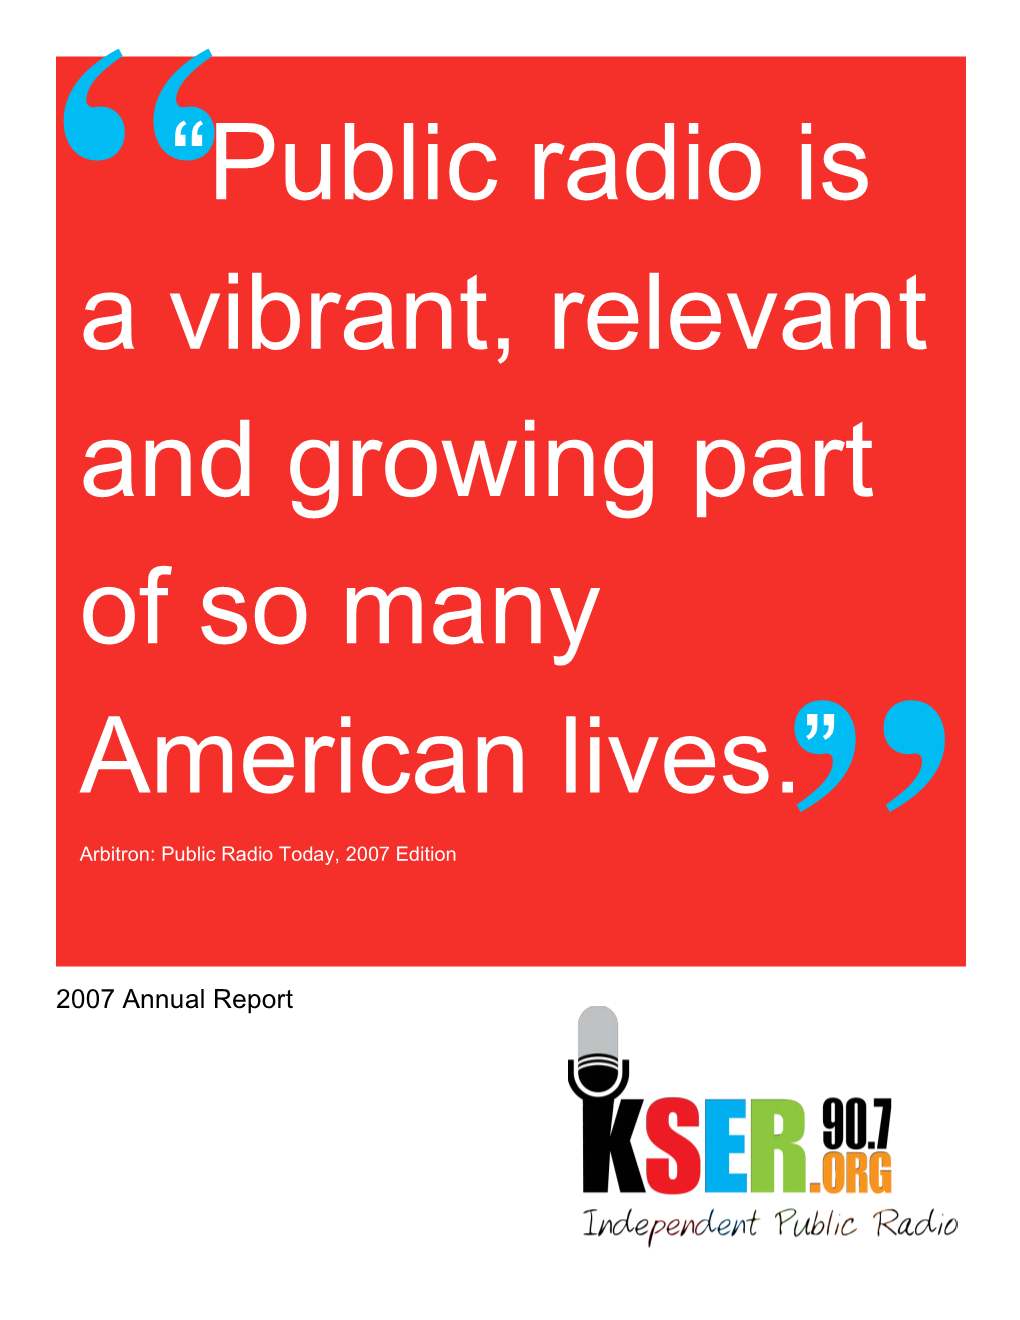 Public Radio Is a Vibrant, Relevant and Growing Part of So Many